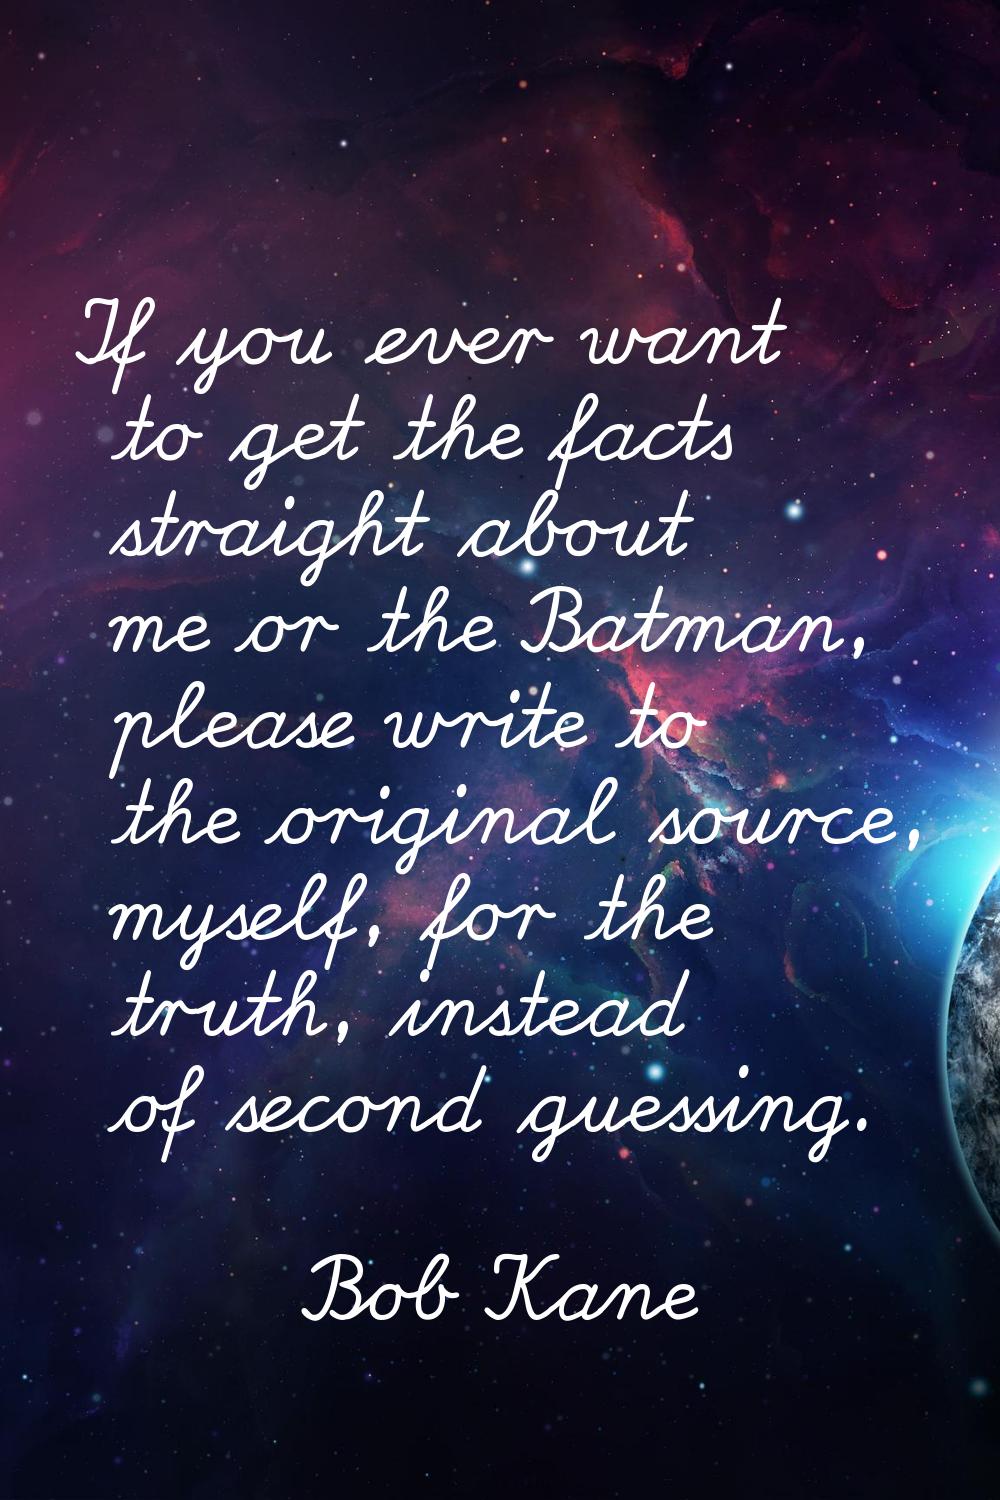 If you ever want to get the facts straight about me or the Batman, please write to the original sou